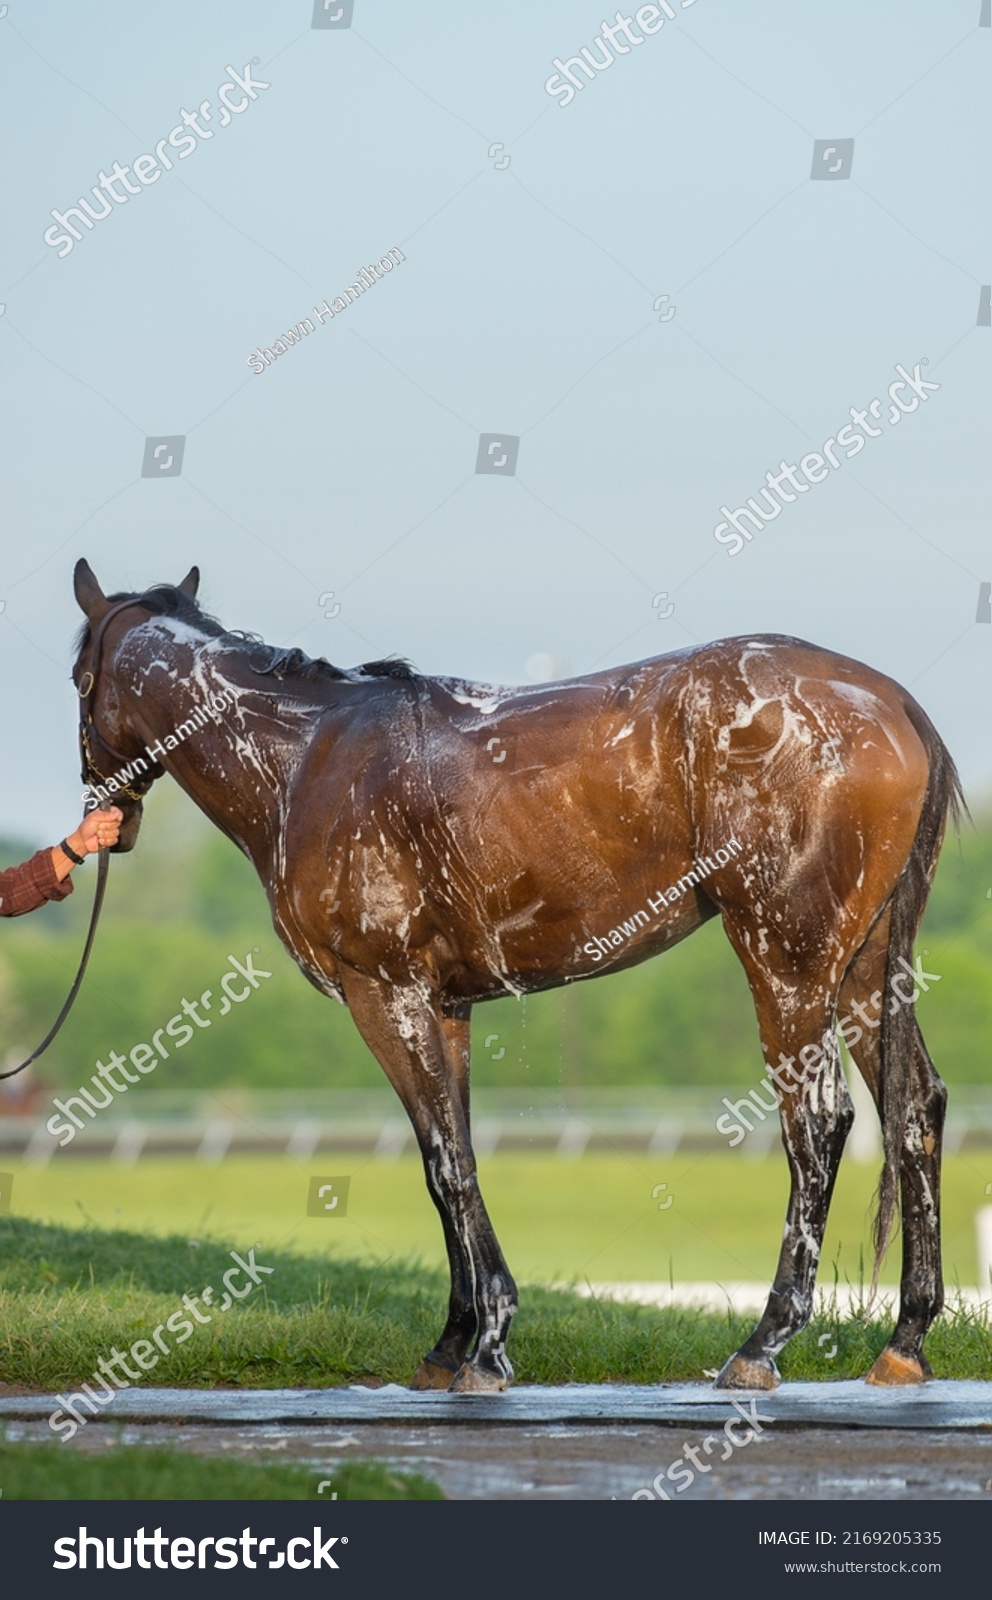 full body of thoroughbred horse being shampooed and bathed shampoo suds on back and legs water dripping horse standing on rubber mat in outdoor washing area at racetrack Kentucky  vertical format  #2169205335